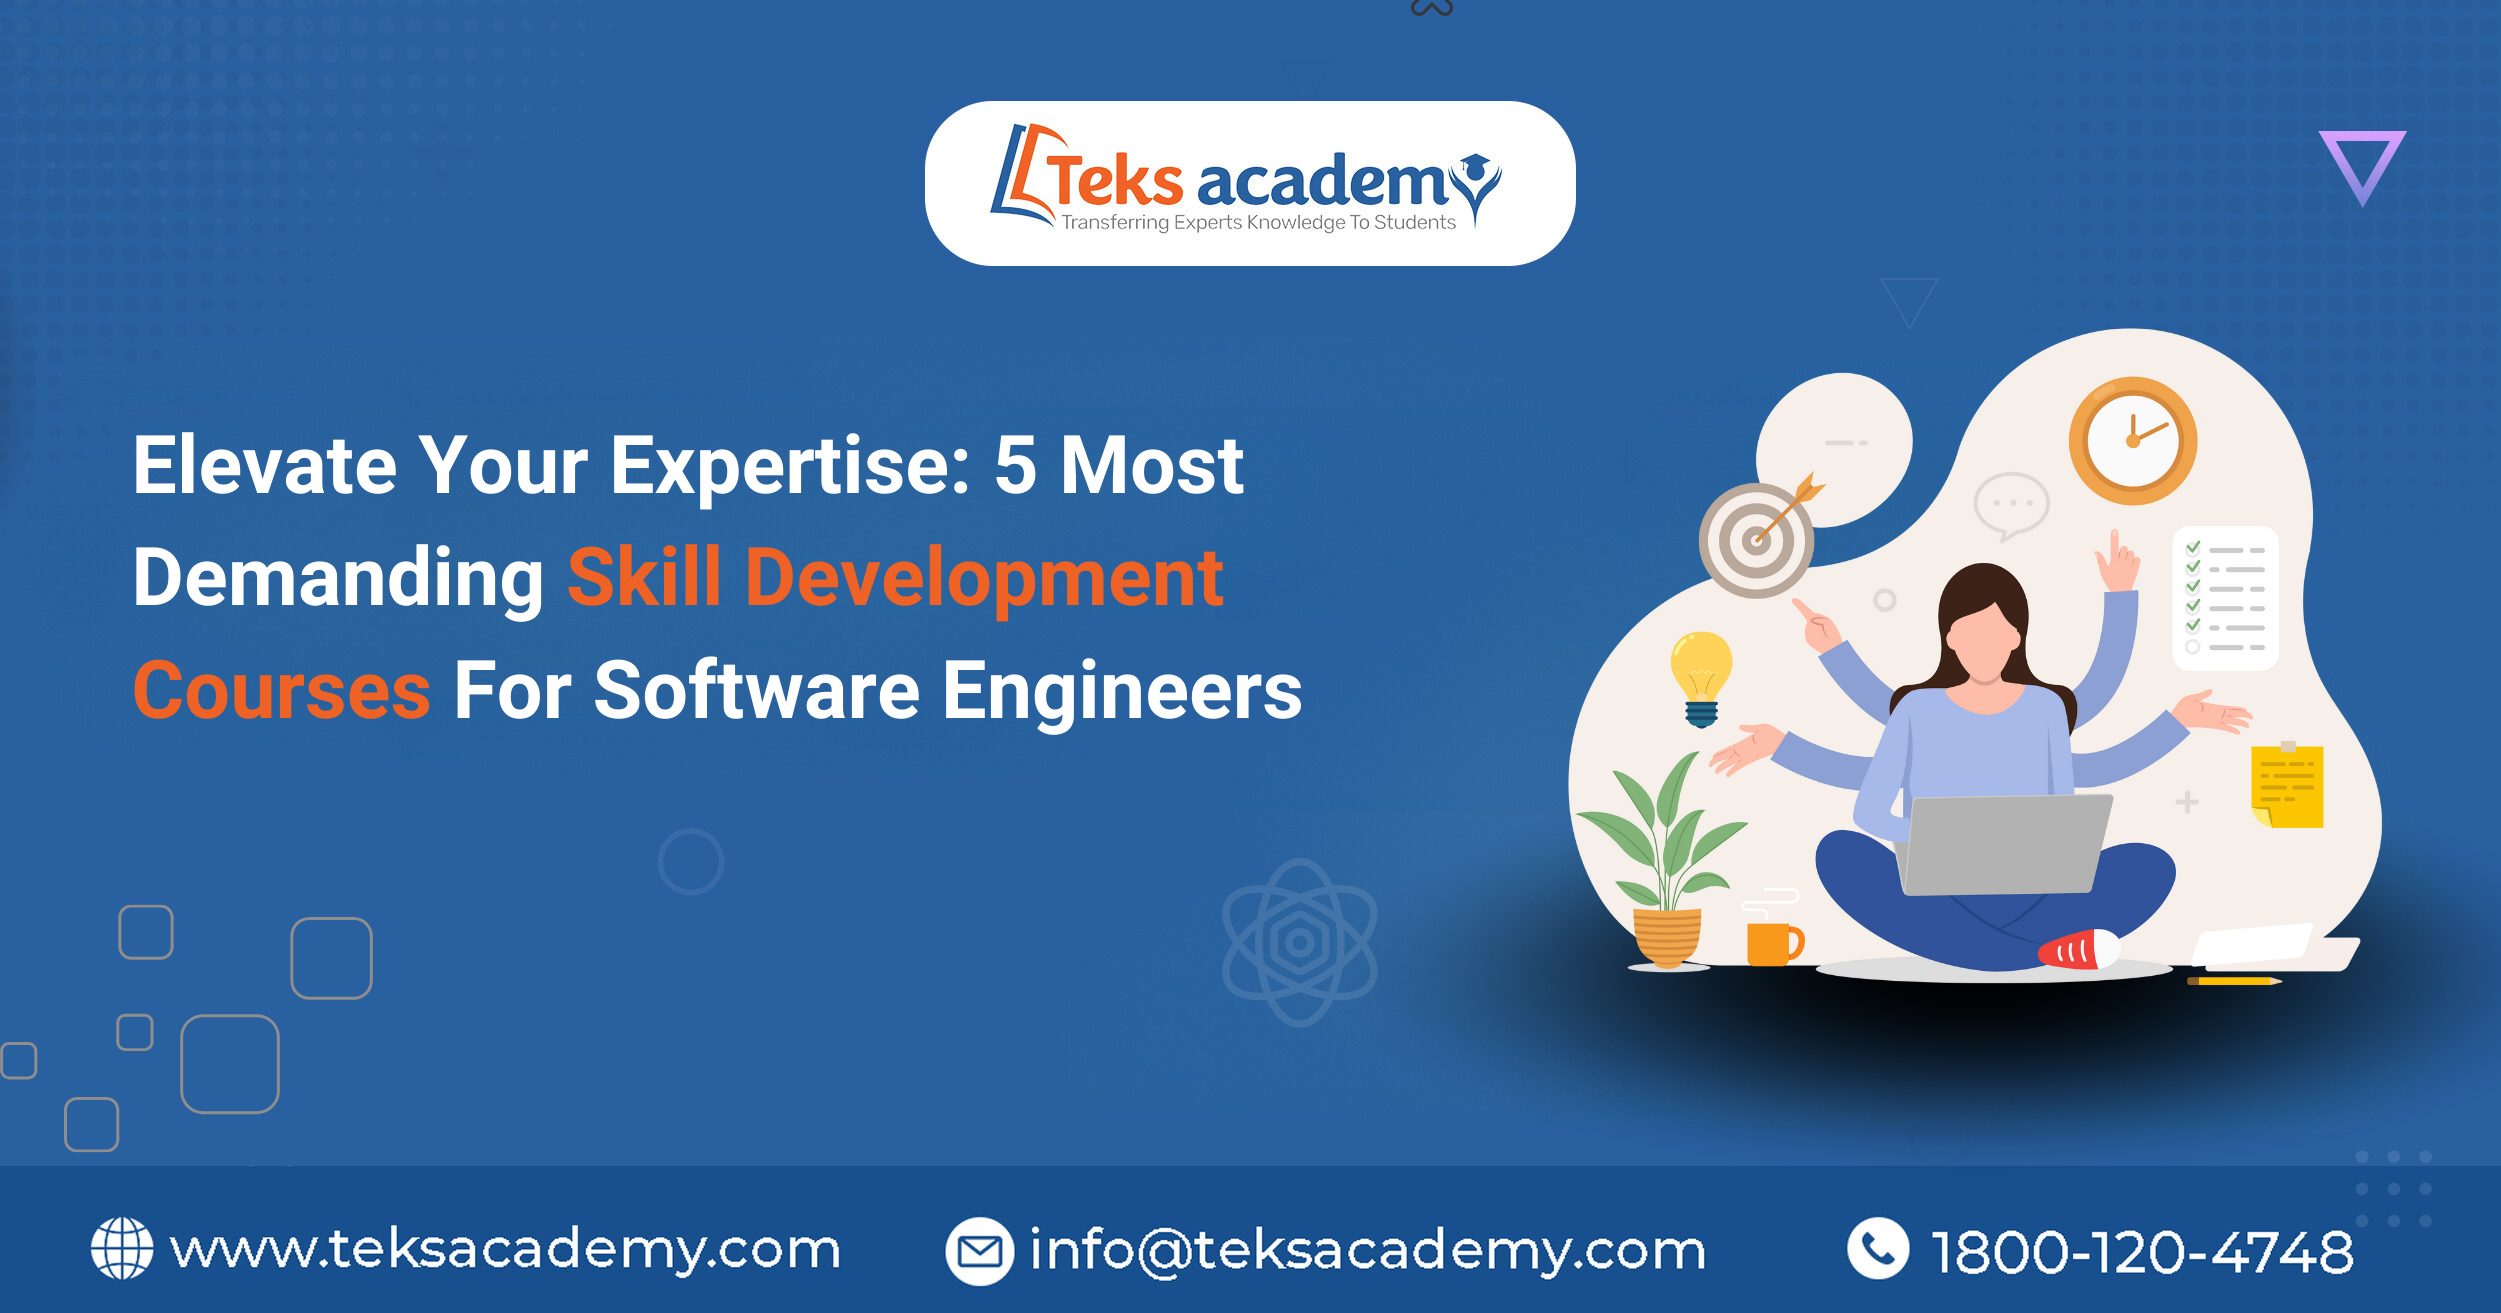 Elevate Your Expertise: 5 Most Demanding Skill Development Courses For Software Engineers